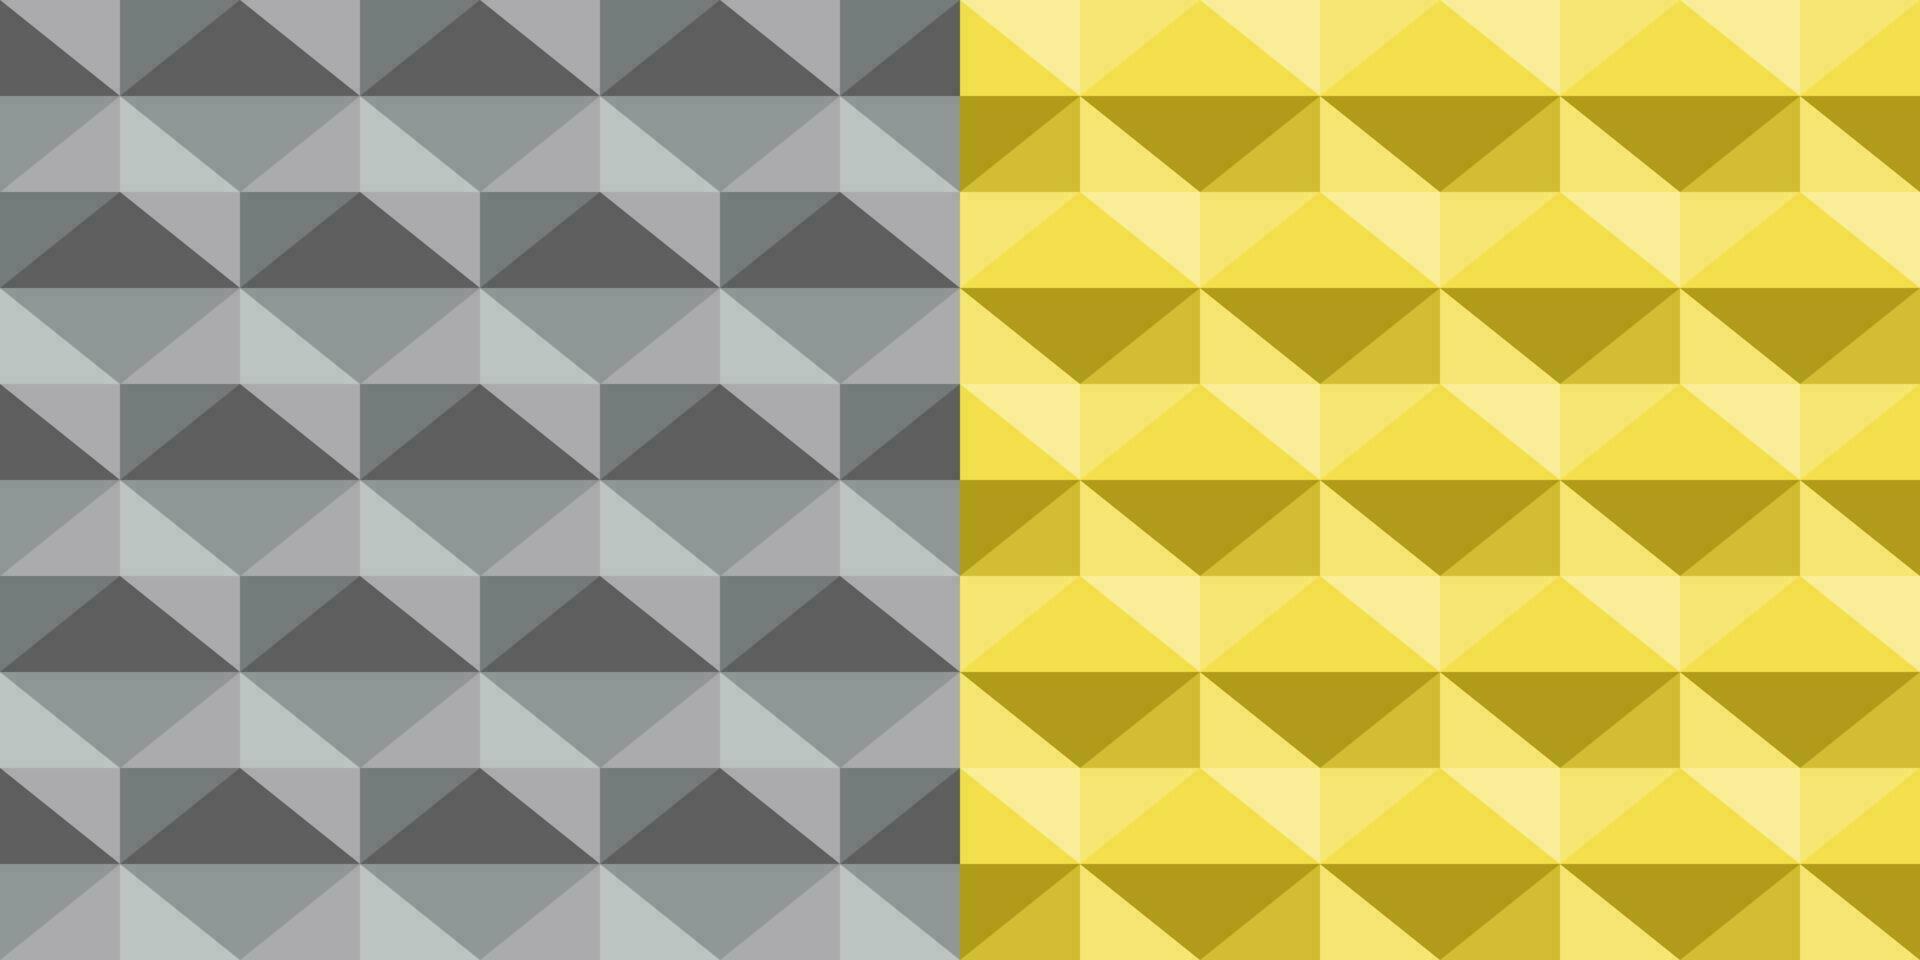 Seamless abstract background. Triangle zigzag pattern, diamond shape. Color yellow and gray. Textured design for fabric, tile, cover, poster, textile, backdrop, wall. Vector illustration.